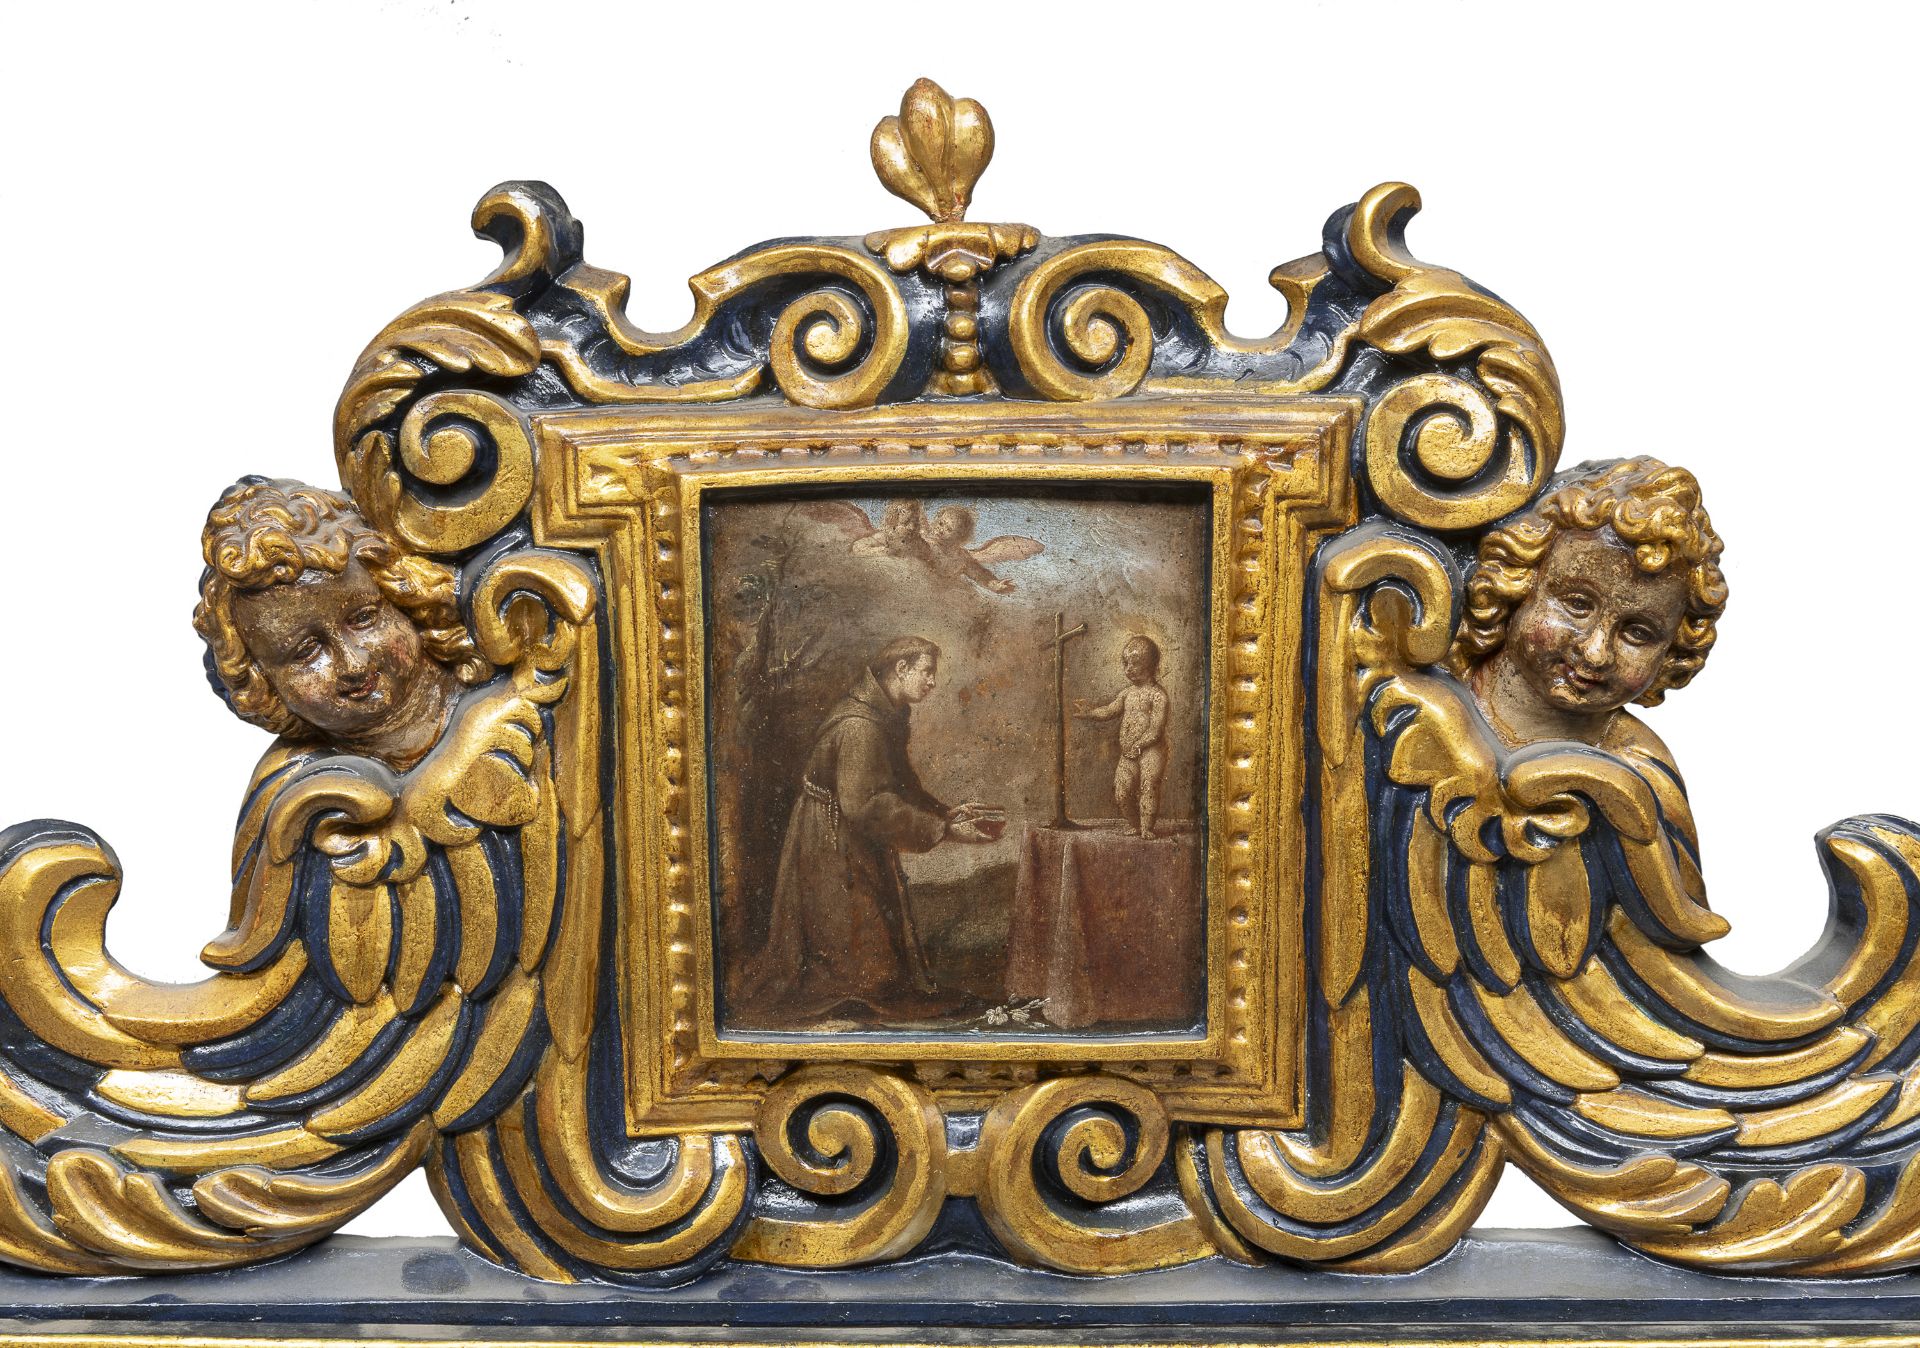 BIG MIRROR WITH PAINTING PROBABLY 18TH CENTURY NAPLES - Image 2 of 2